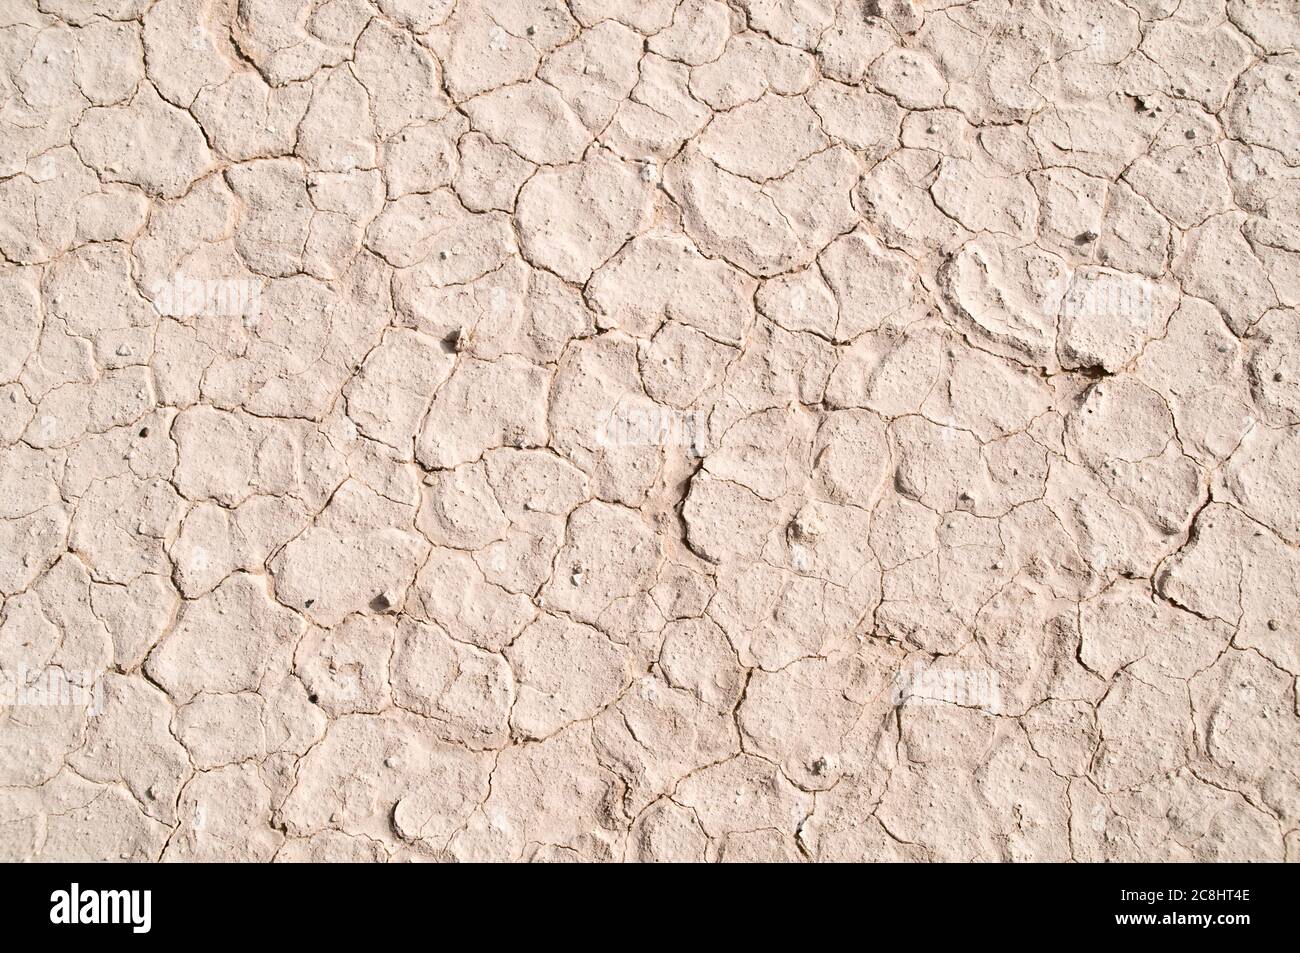 Dry, parched and cracked white mud patterns in the eastern desert of the Badia region, Wadi Dahek, Hashemite Kingdom of Jordan. Stock Photo